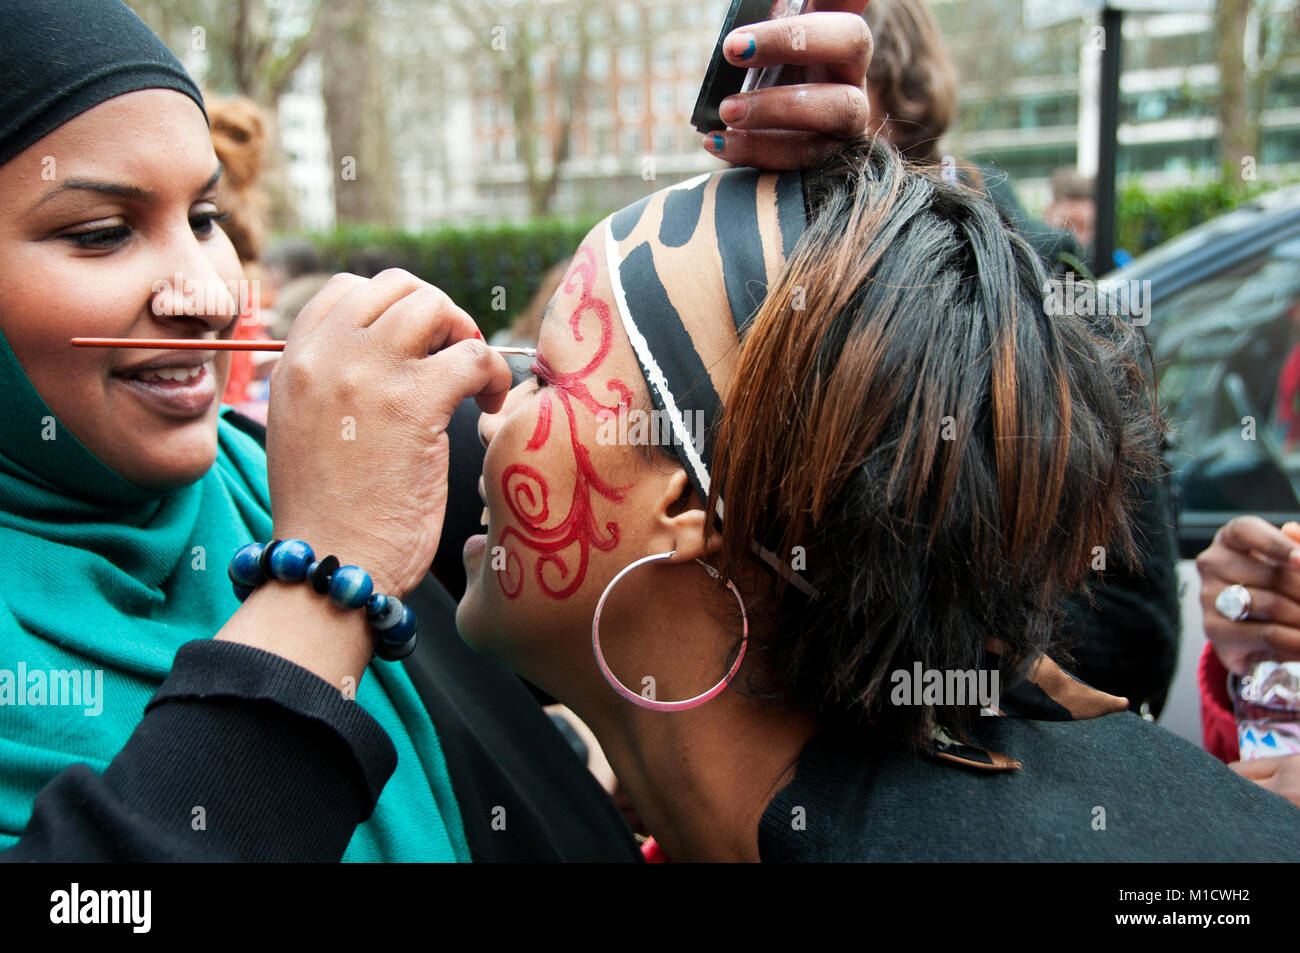 International Women's Day March 8th 2009. A woman wearing a veil paints the face of an Afro-Caribbean woman Stock Photo